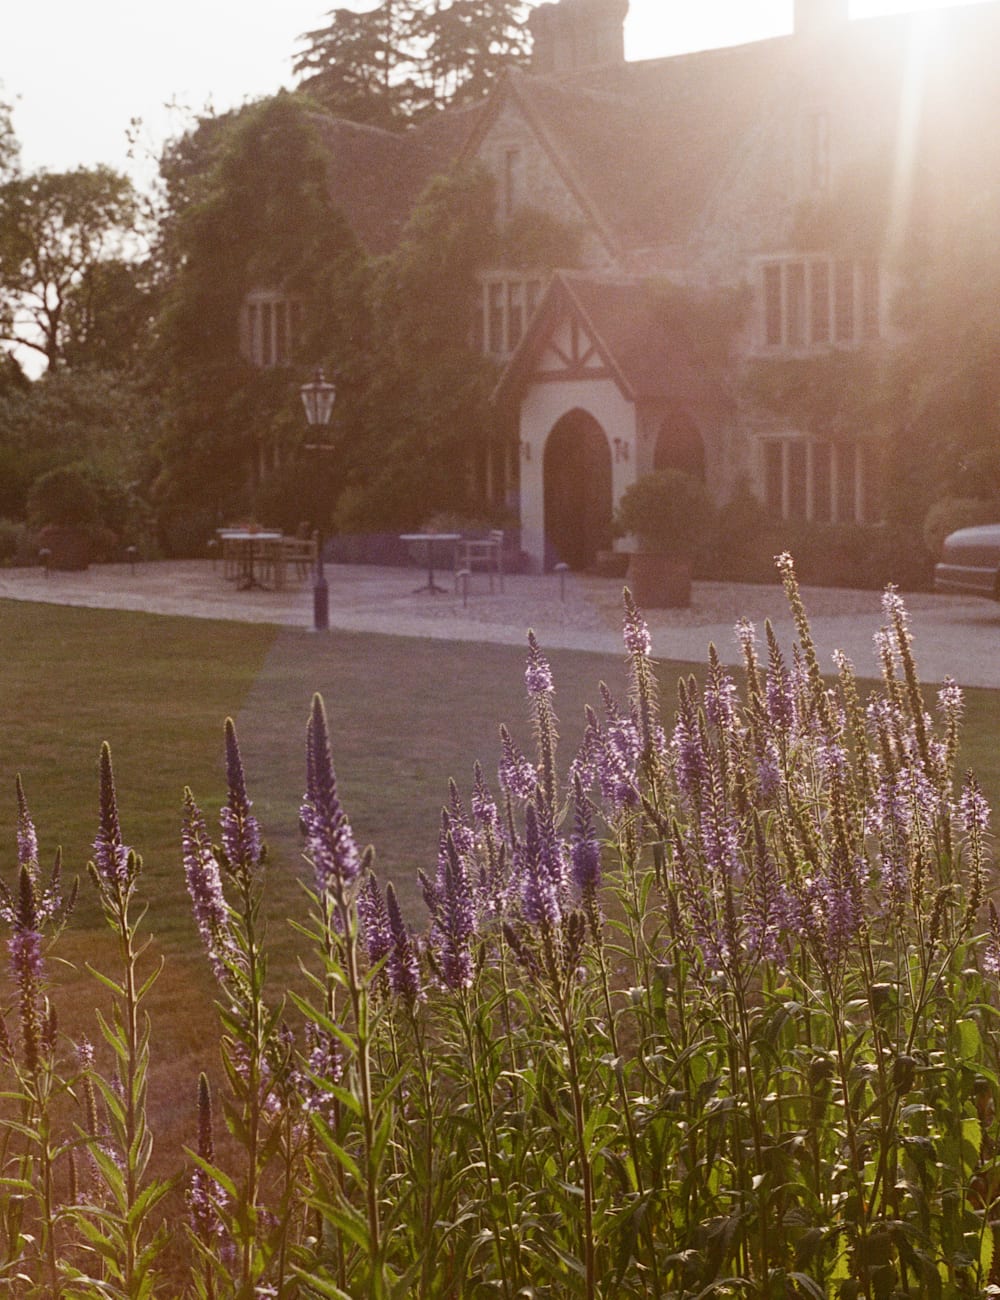 Hotel exterior behind lavender in the sunlight